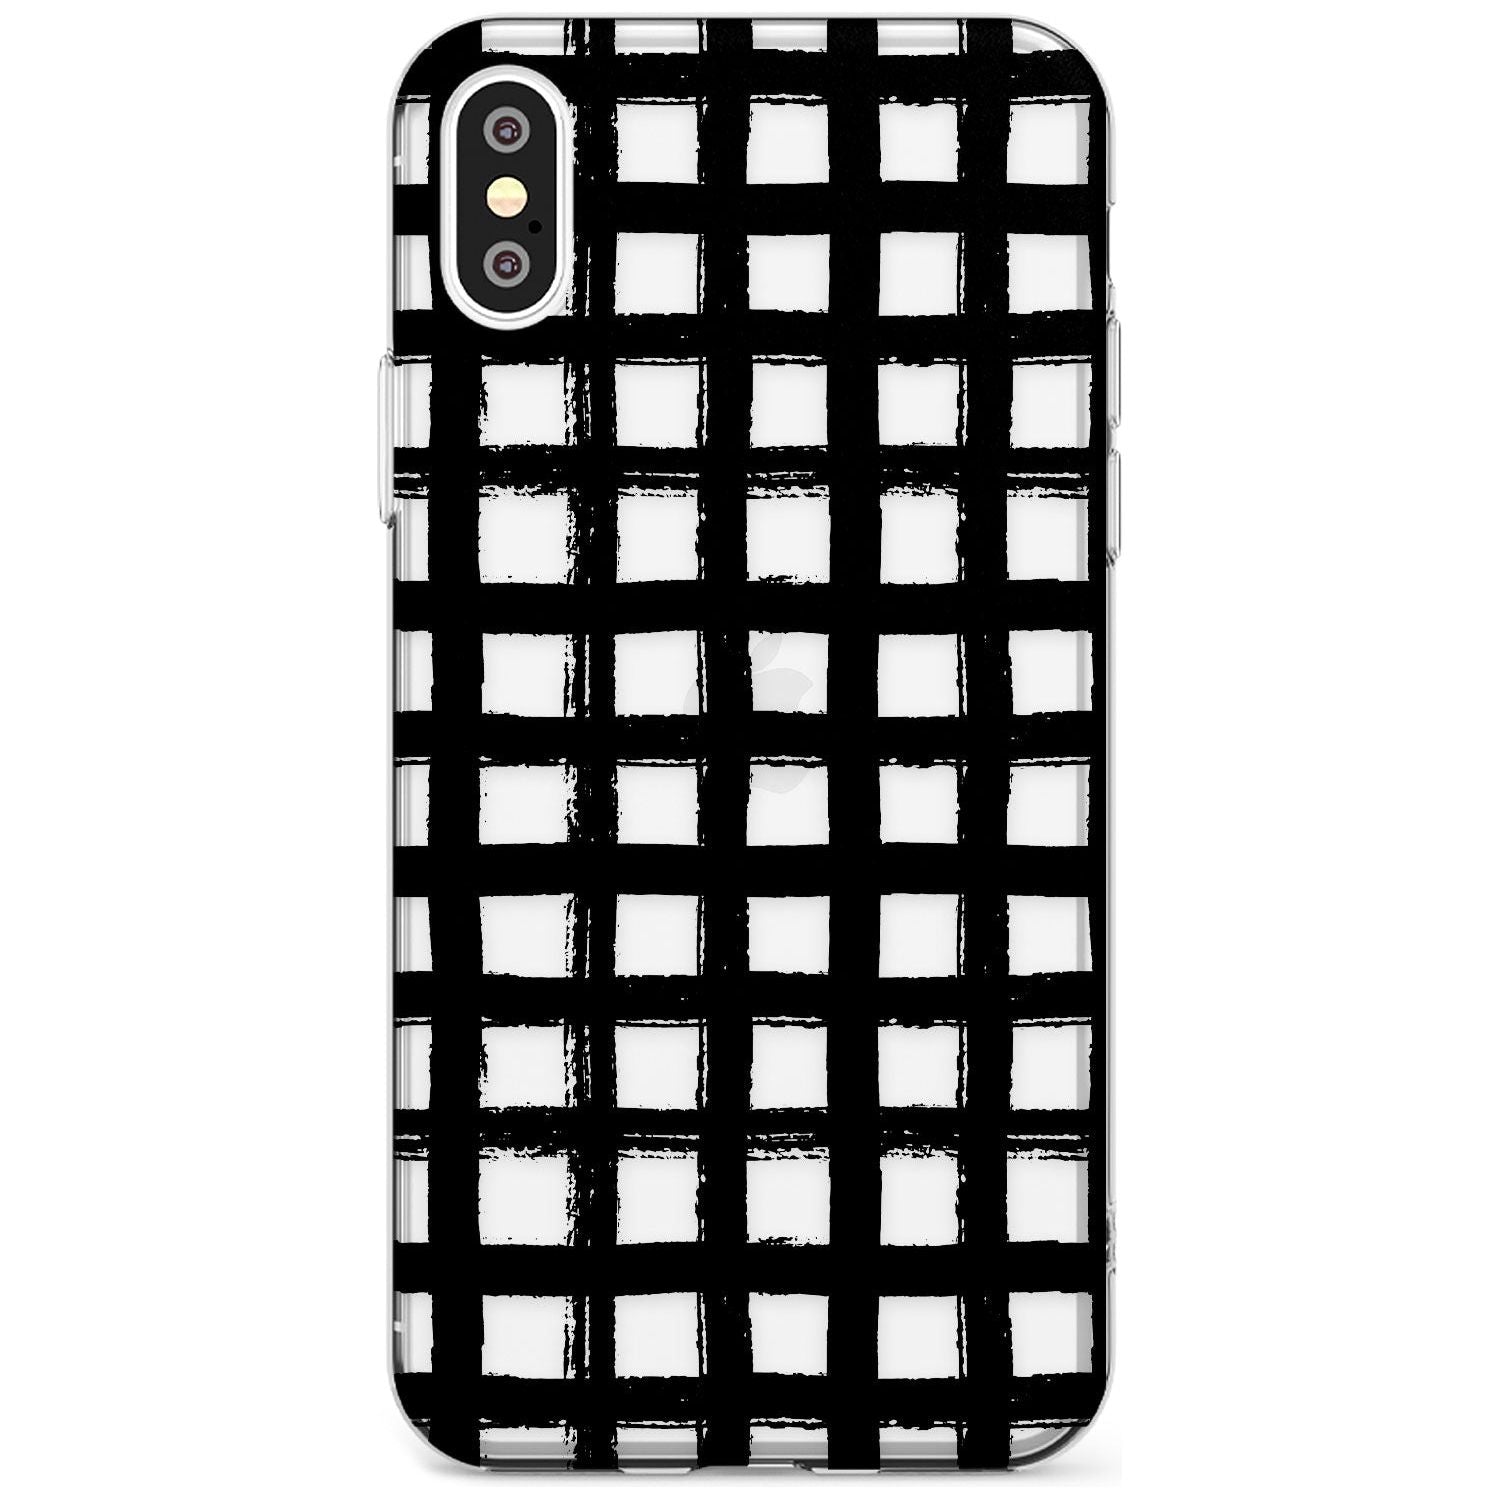 Messy Black Grid - Clear Black Impact Phone Case for iPhone X XS Max XR